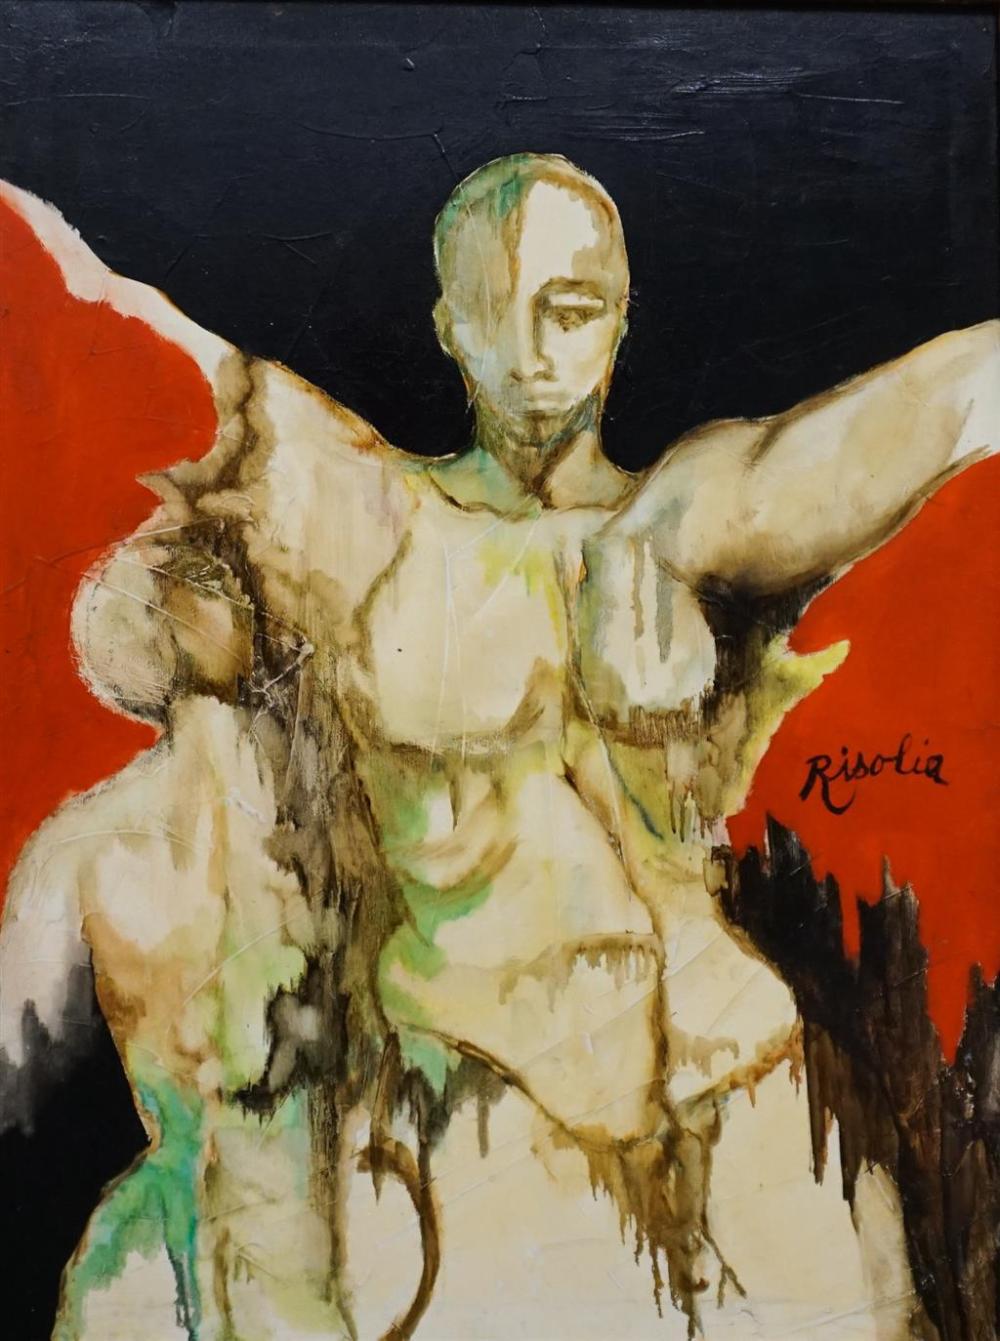 RISOLIA ABSTRACTED WOMEN OIL 328b8a